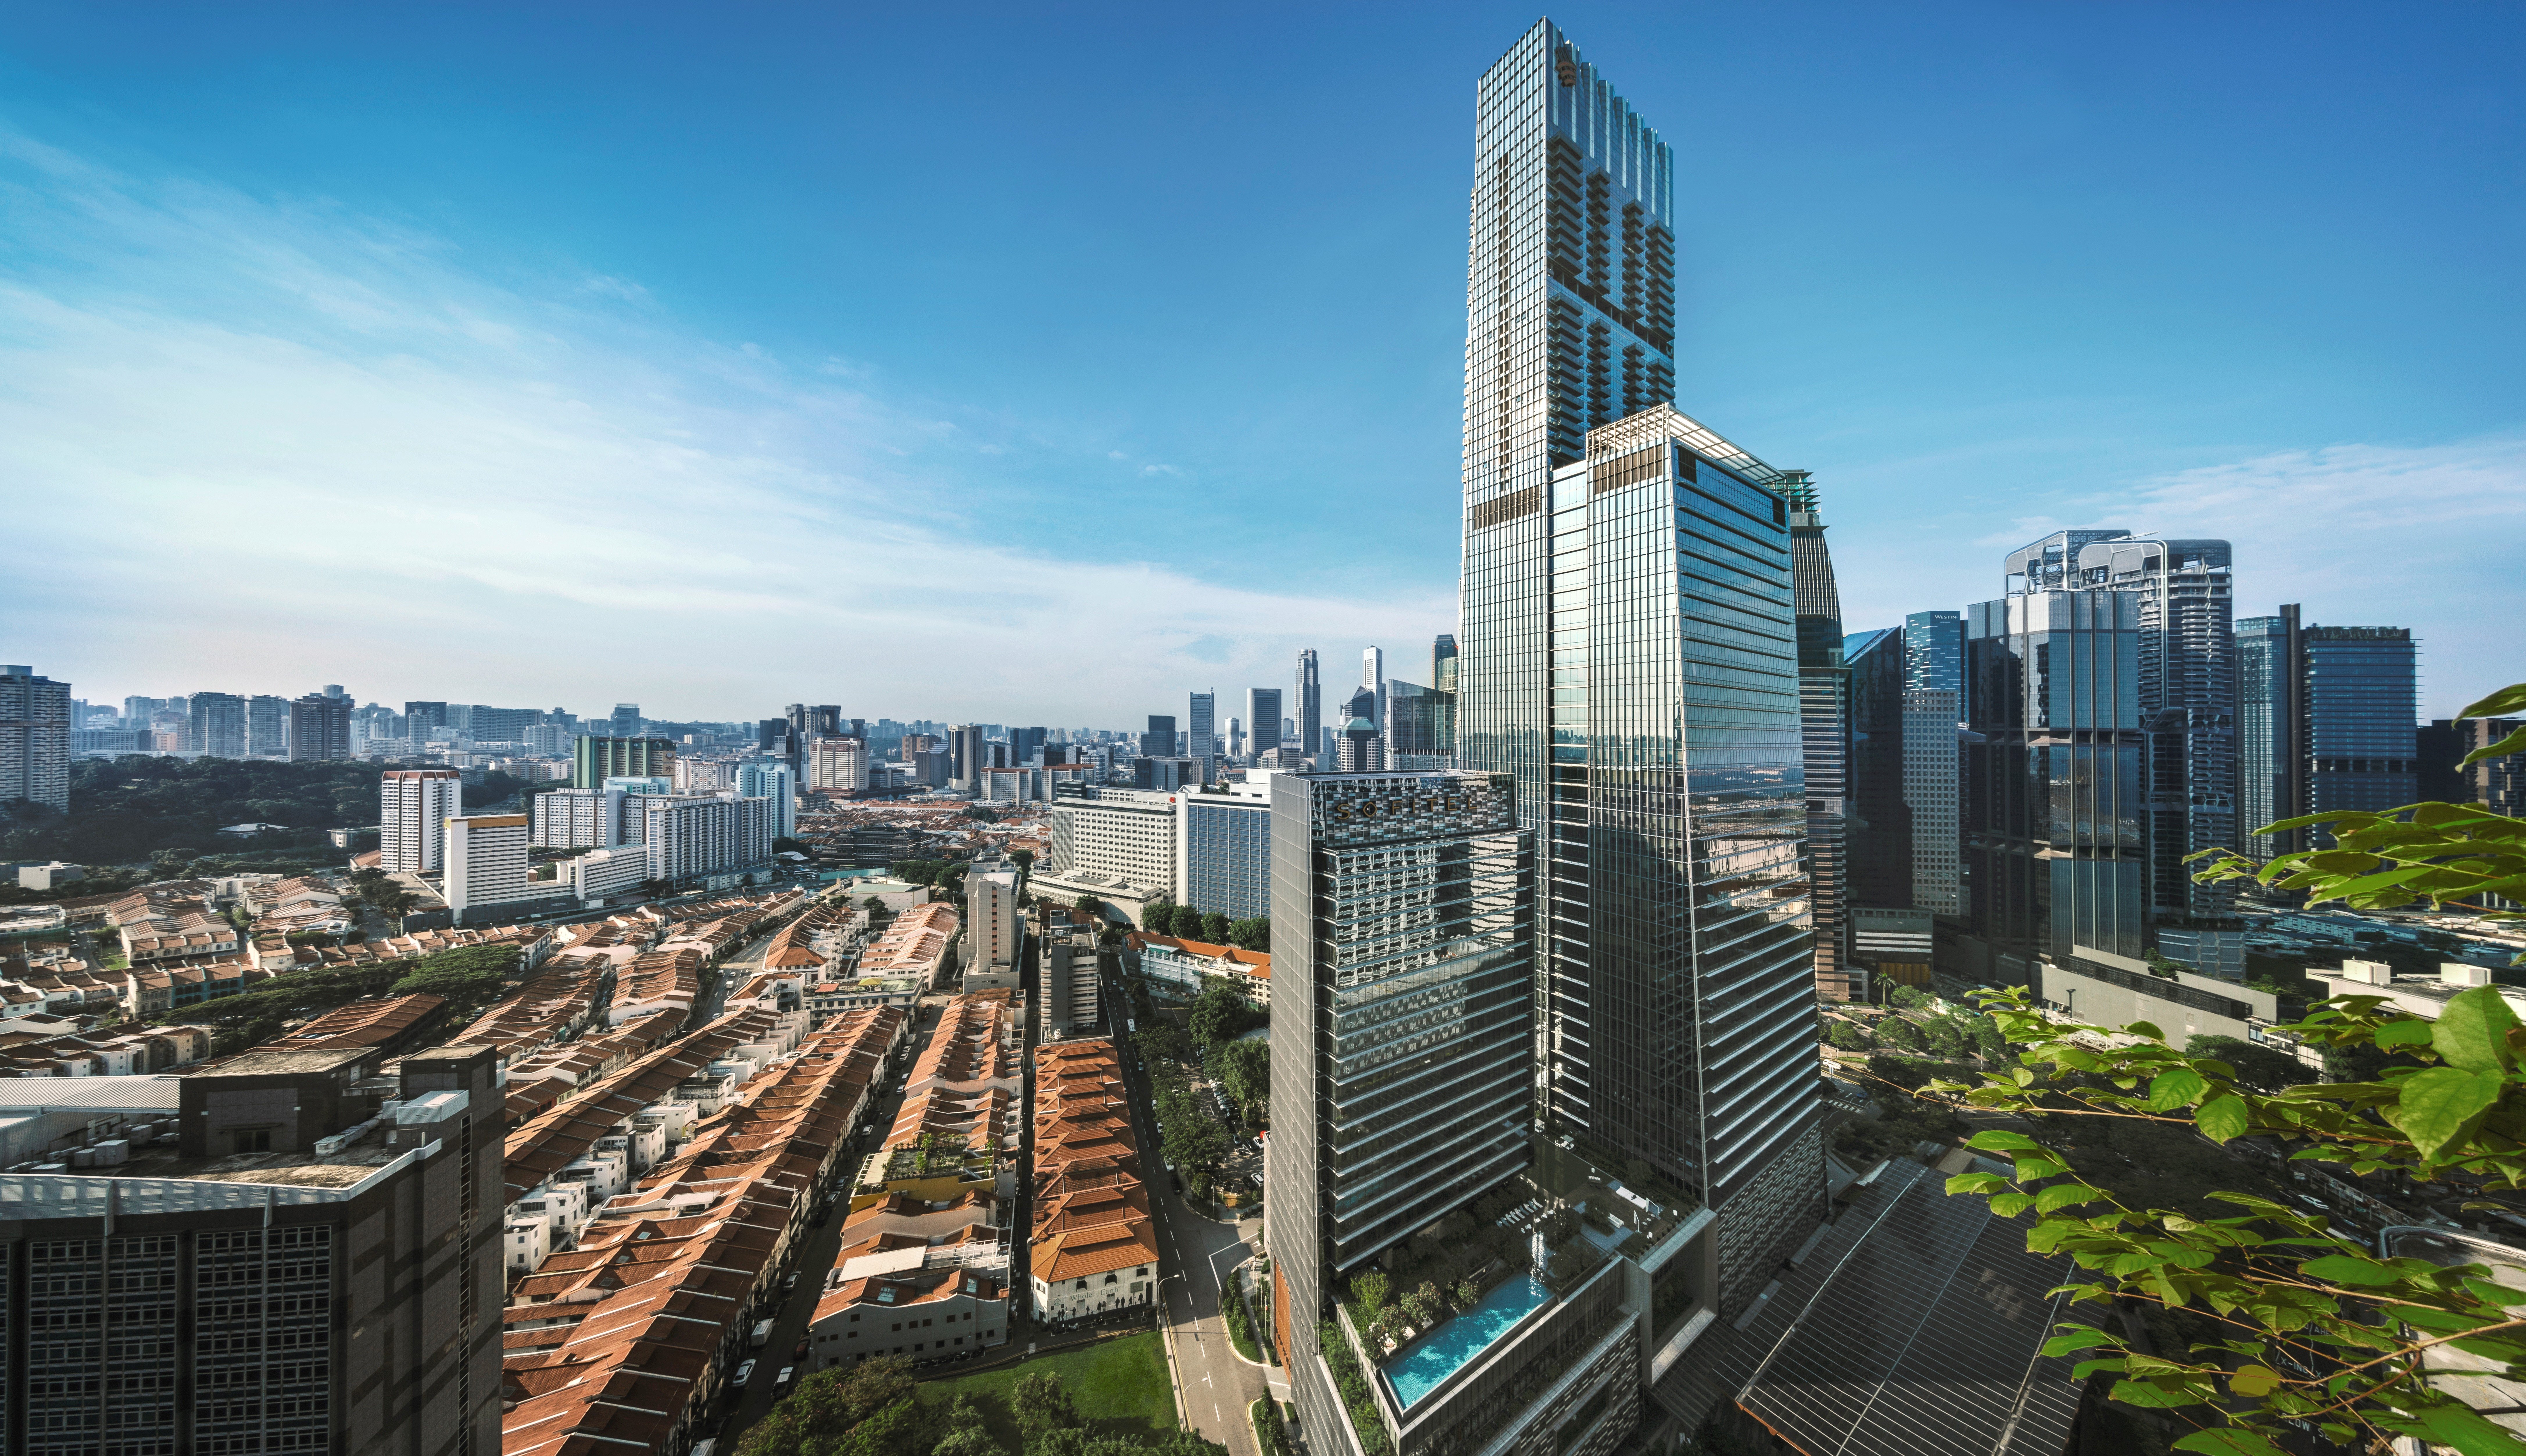 Singapore’s tallest building, the S$3.2 billion Guoco Tower, is the latest in a string of mega developments in the island nation. Photo: Handout